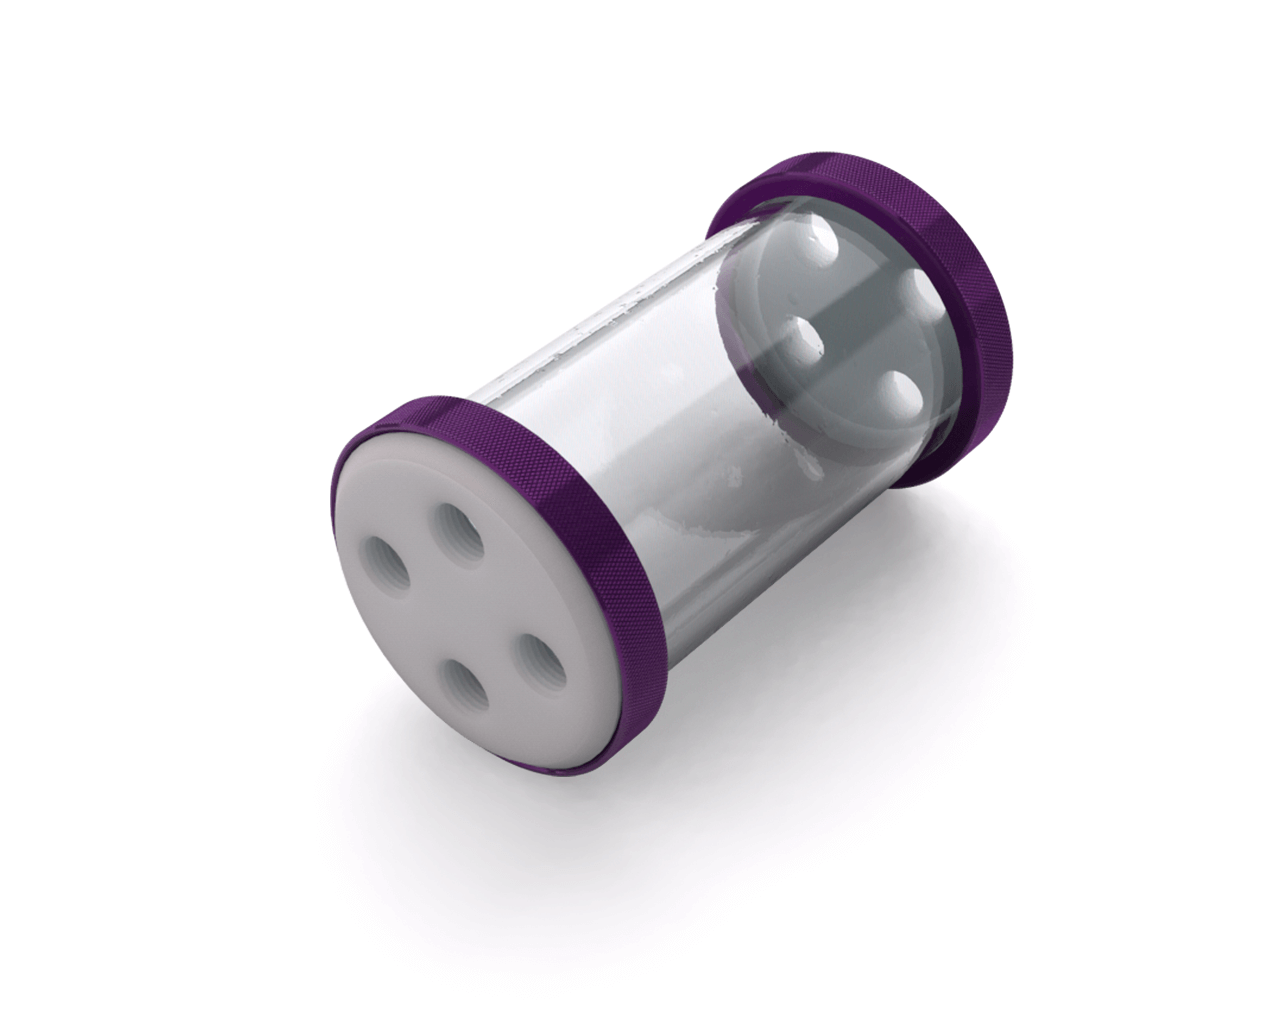 PrimoChill CTR Low Profile Phase II Reservoir - White POM - 120mm - PrimoChill - KEEPING IT COOL Candy Purple